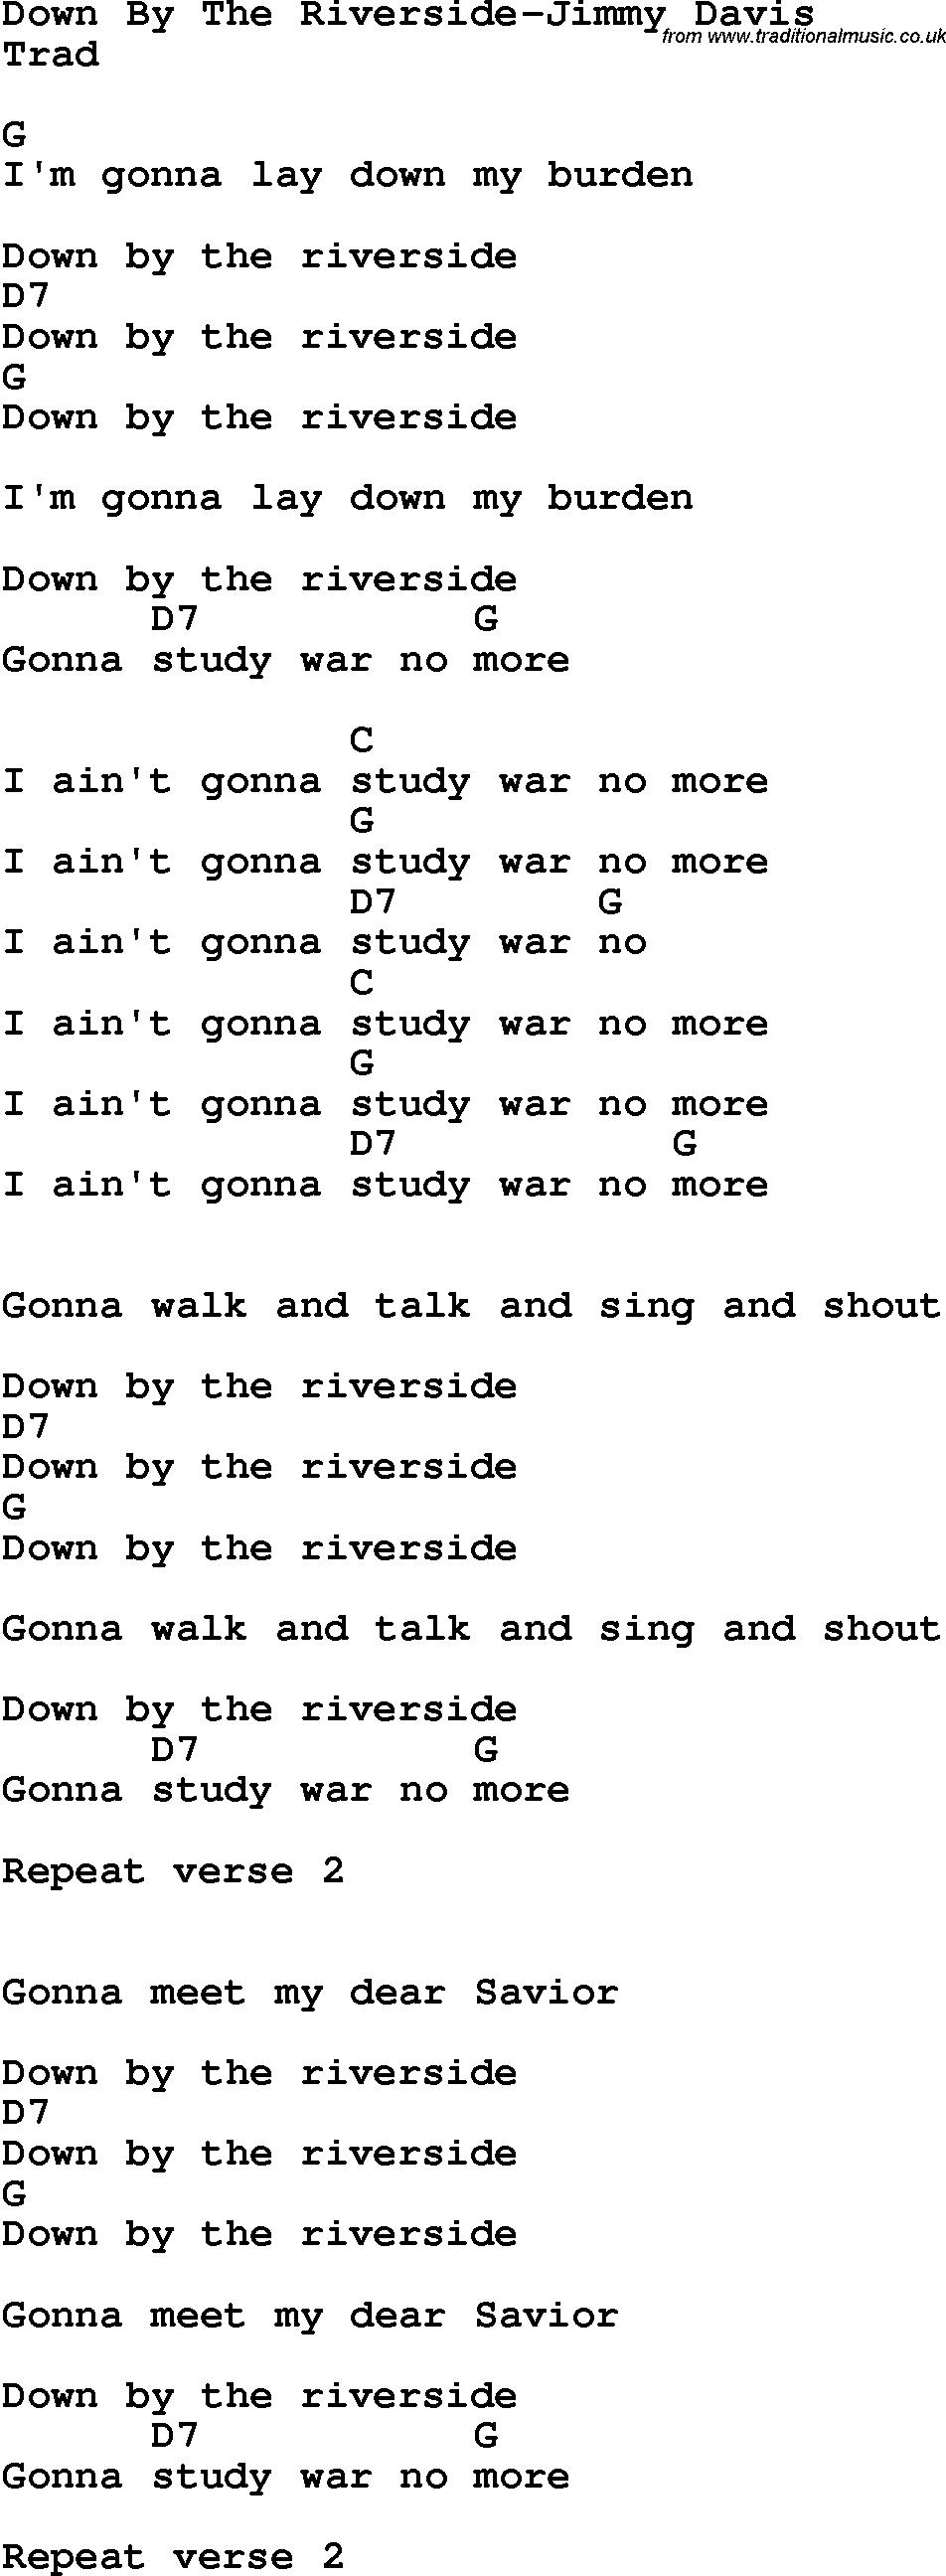 Country, Southern and Bluegrass Gospel Song Down By The Riverside-Jimmy Davis lyrics and chords